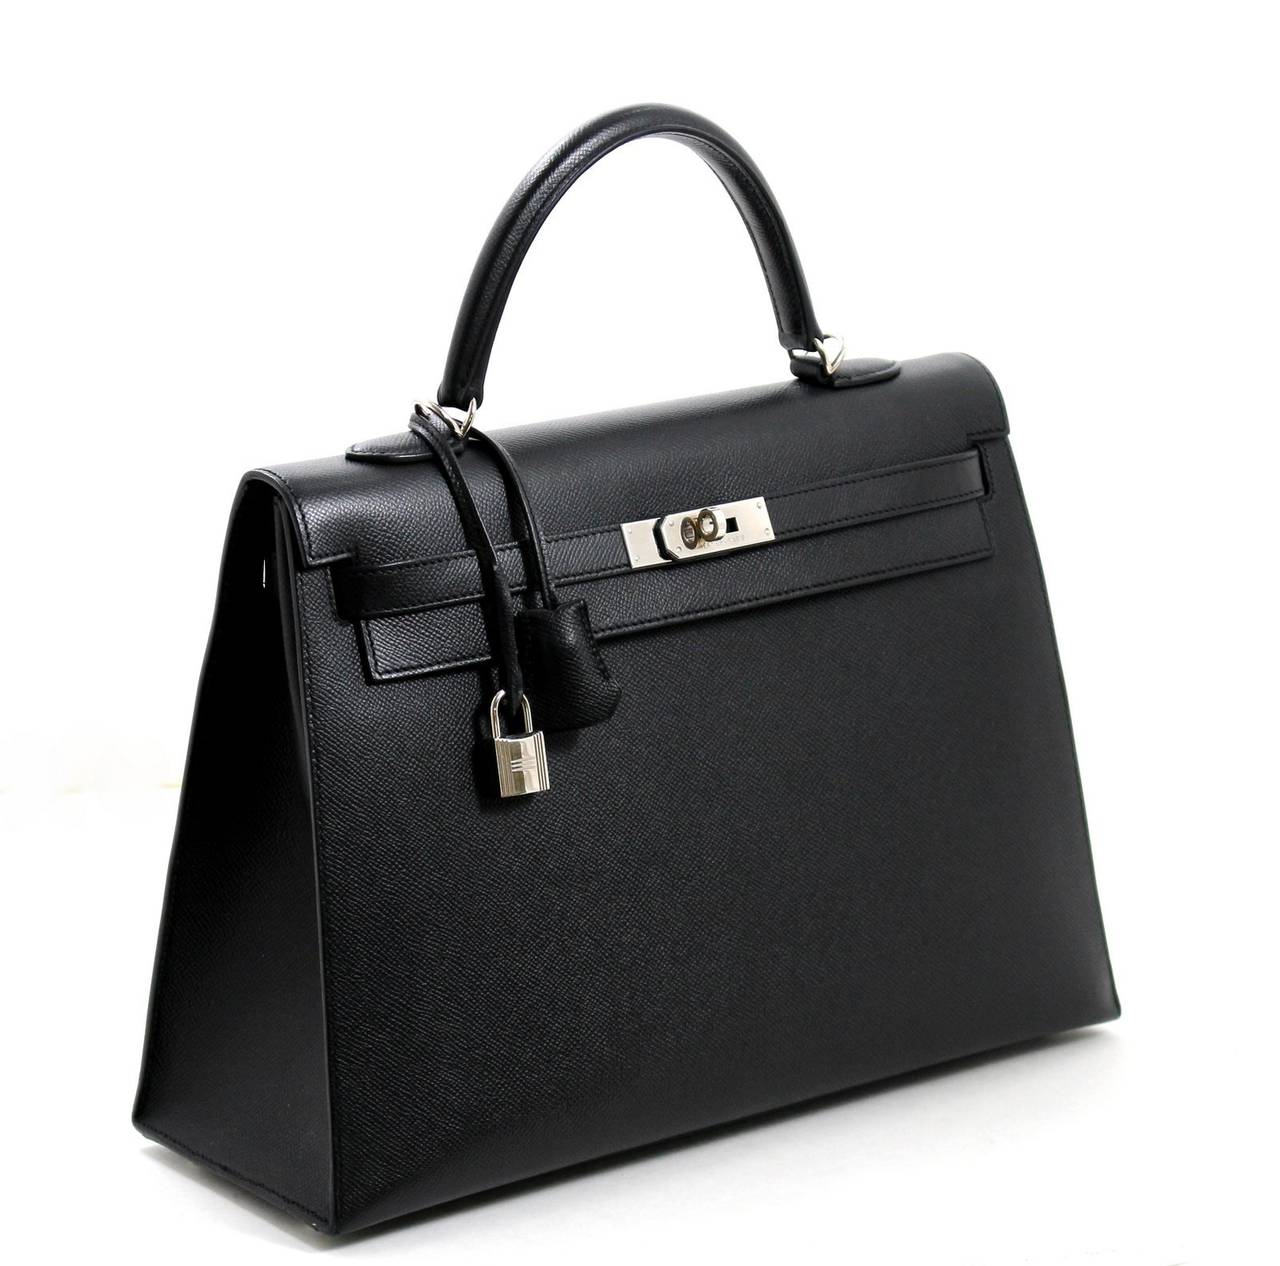 Hermès 35 cm Black Epsom Kelly Bag PHW In Excellent Condition In New York City & Hamptons, NY